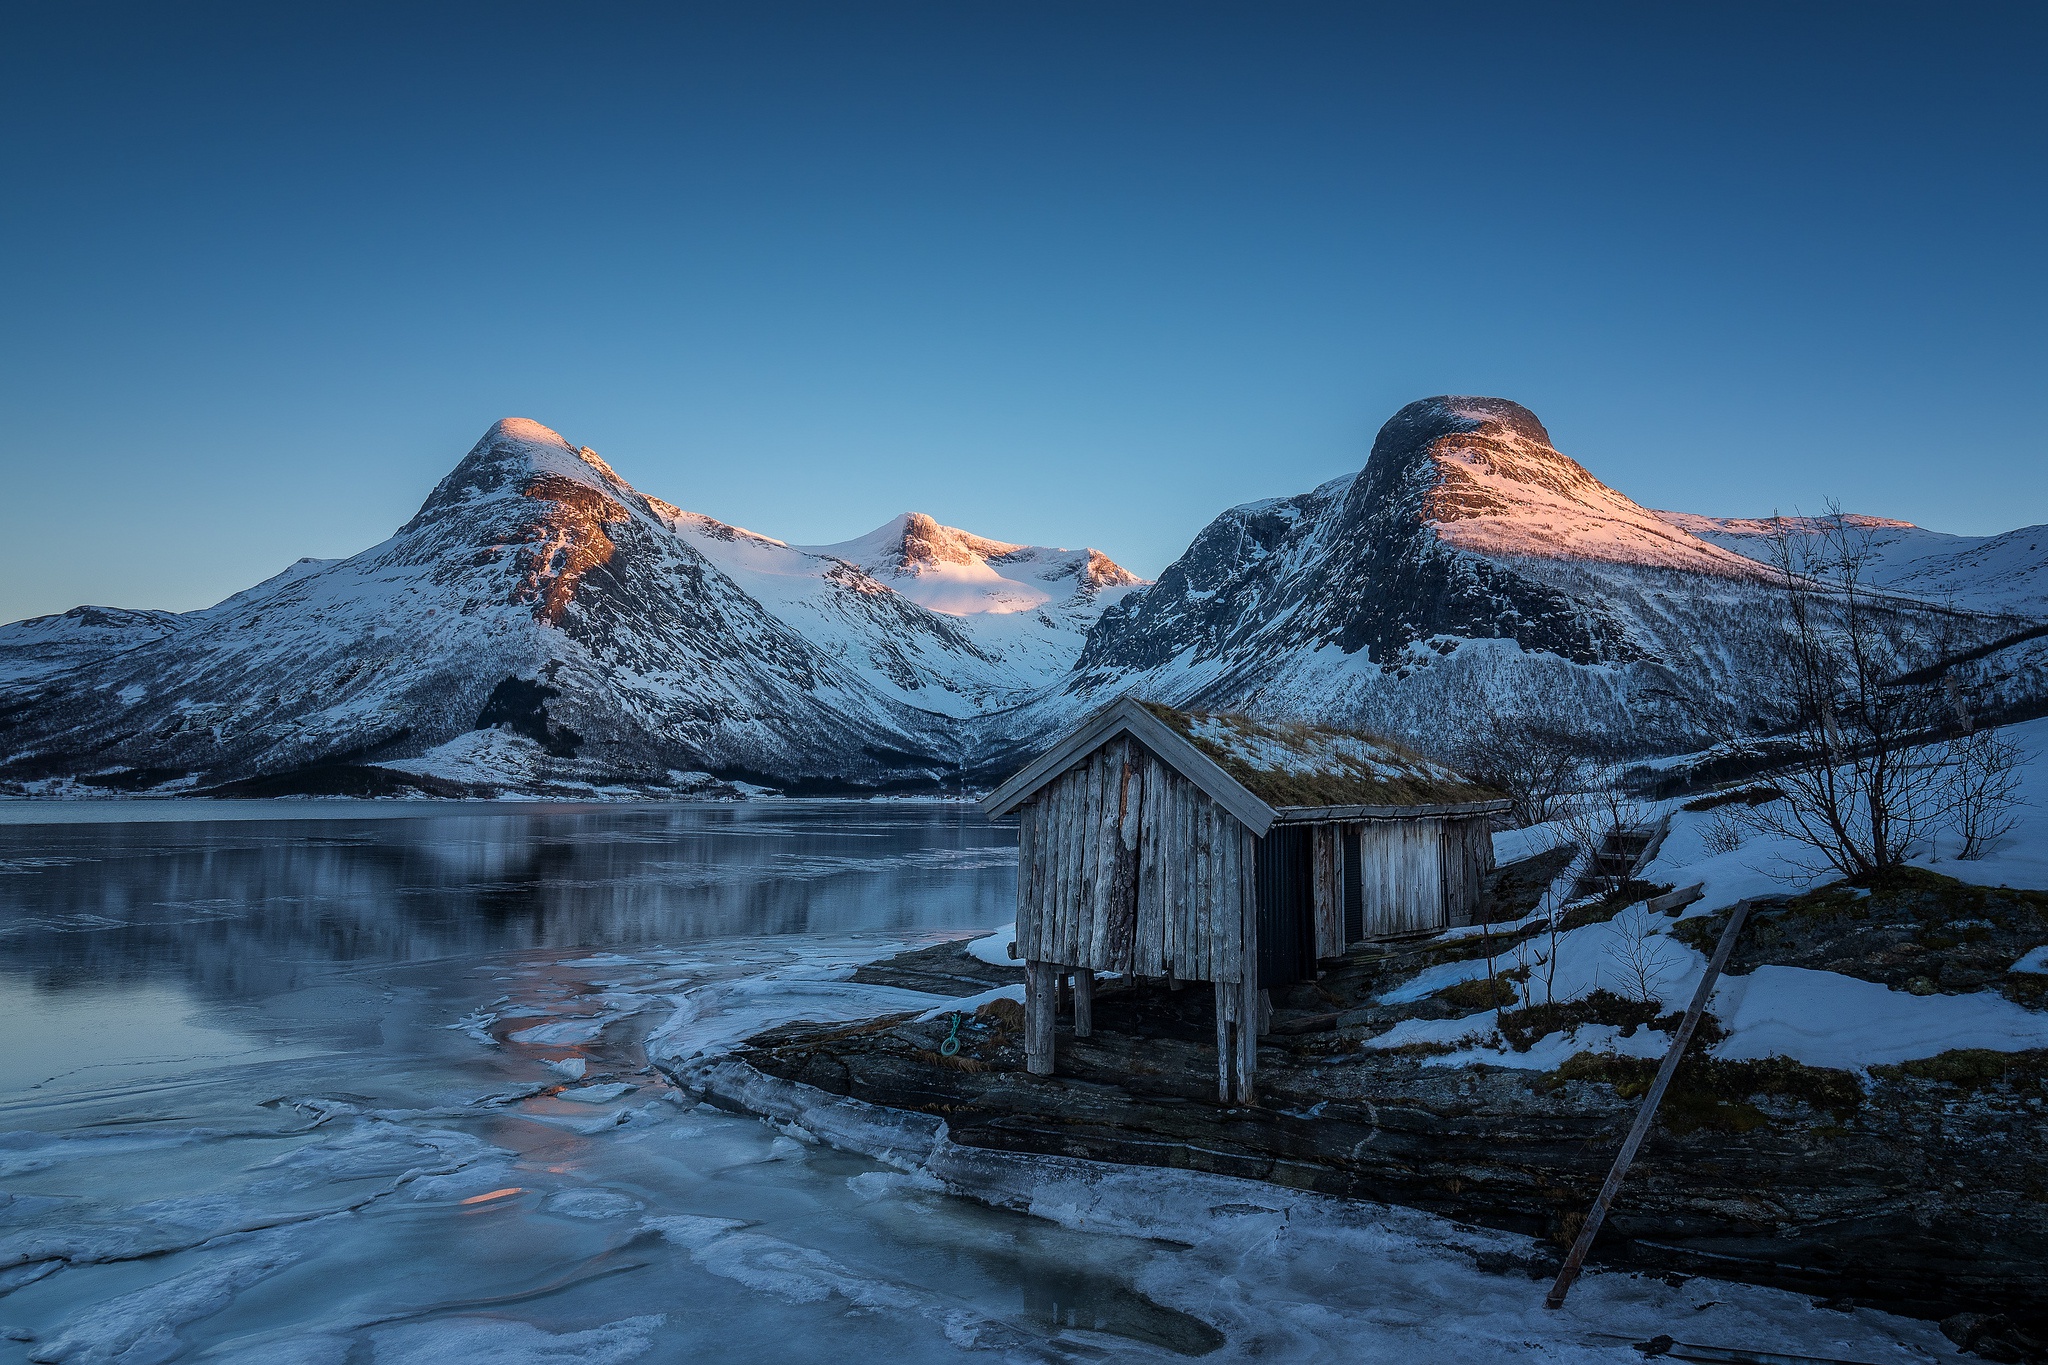 General 2048x1365 Norway nature mountains landscape clear sky ice cabin snowy mountain nordic landscapes cold winter frost outdoors hut